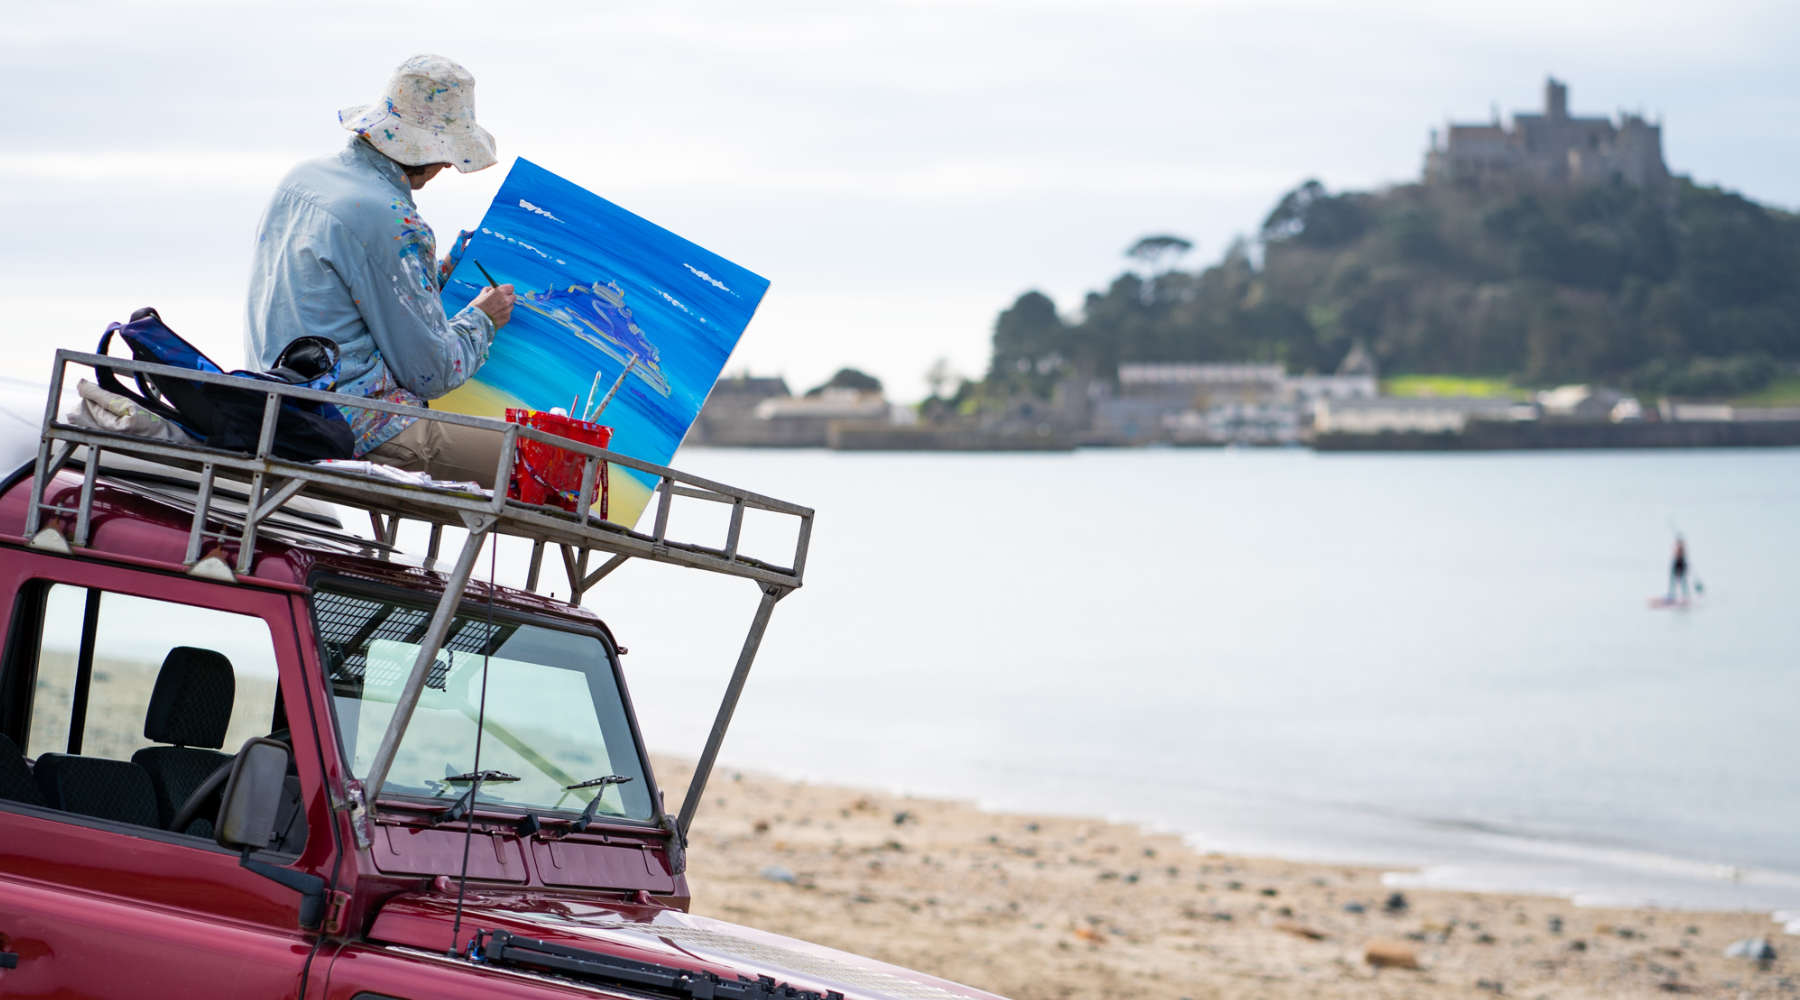 Artist John Dyer painting St Michael's Mount on his Land Rover Defender 110 at Marazion beach in Cornwall